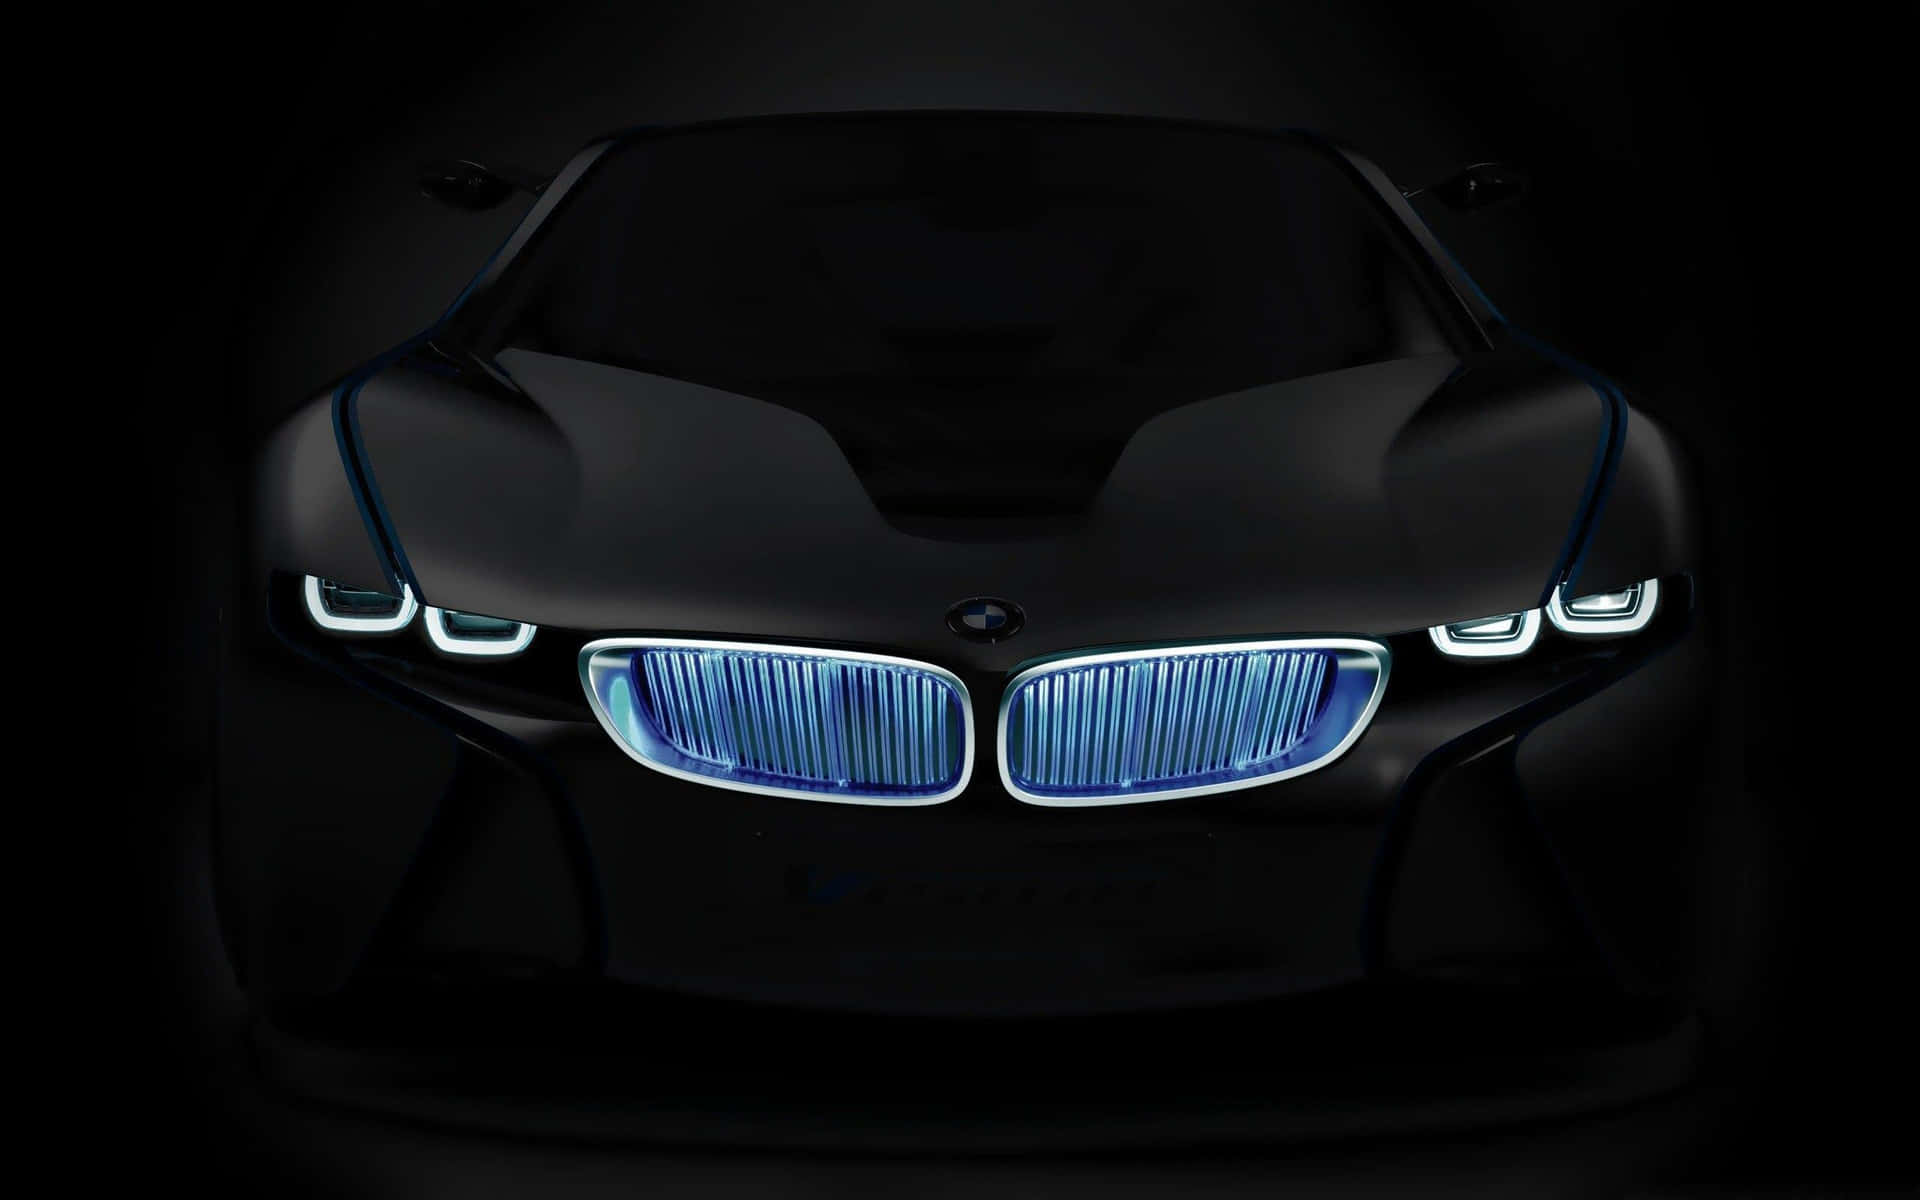 Bmw I8 Concept Car In Black And White